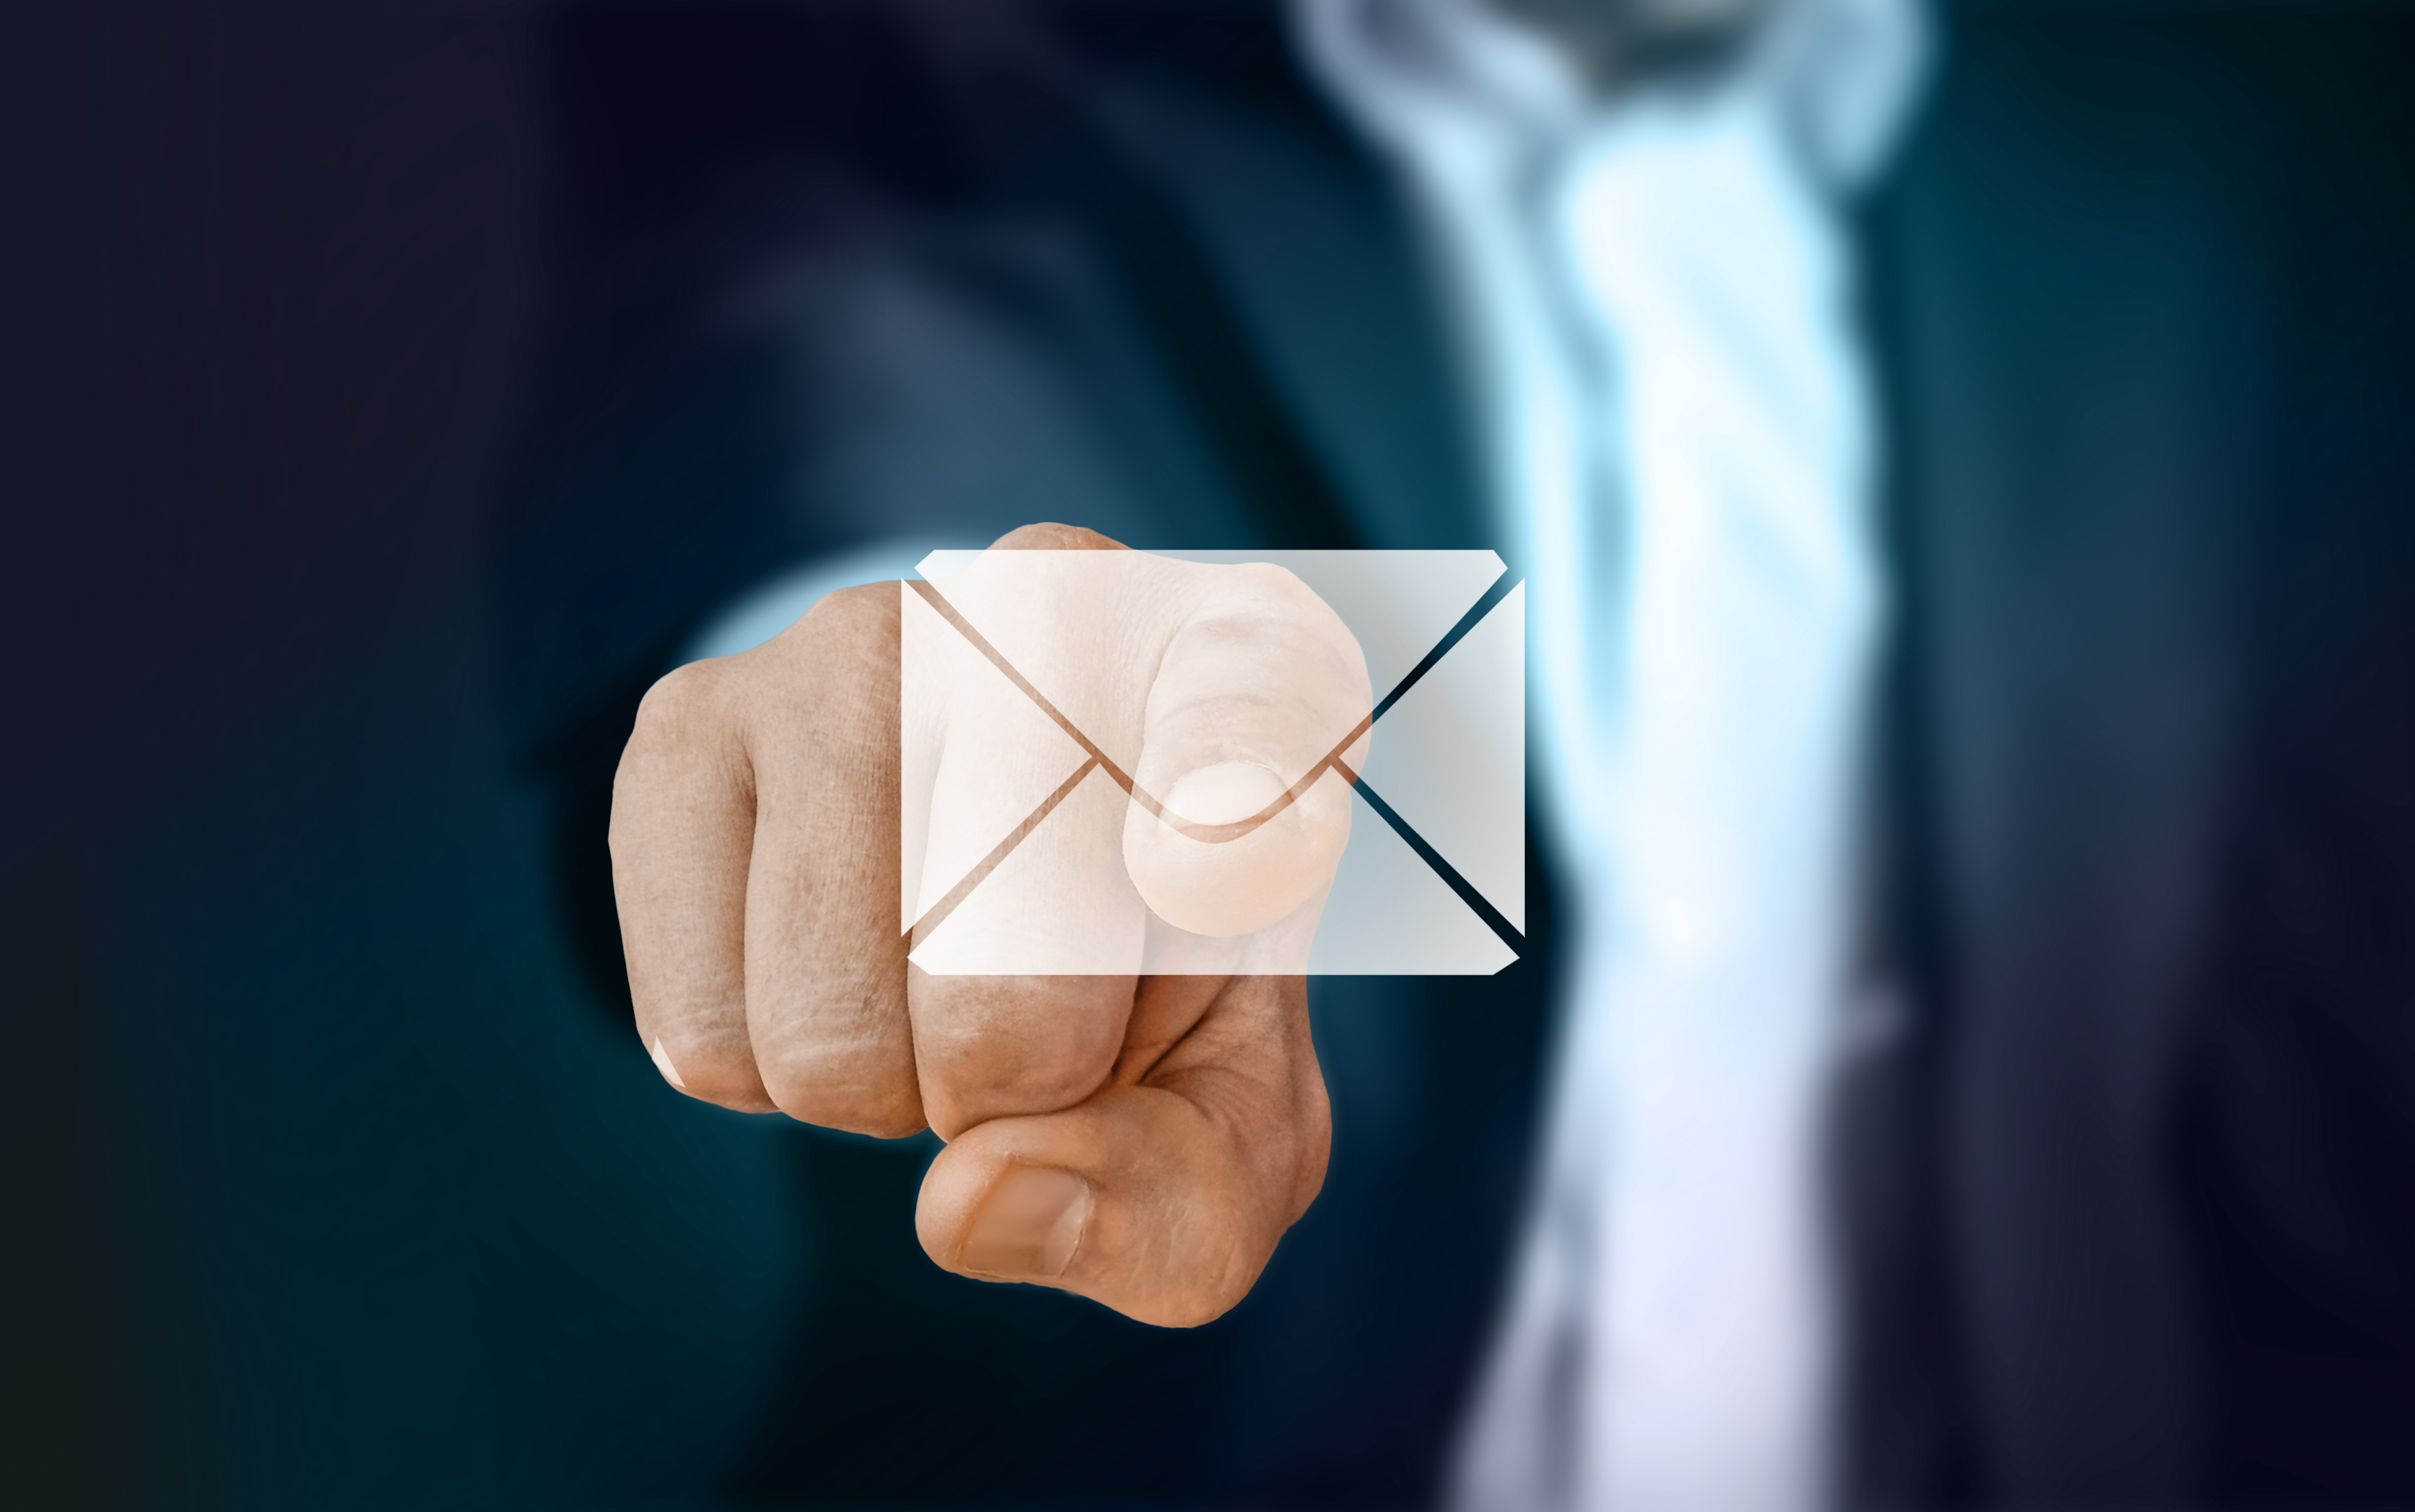 Get your email validated and keep up with data rates